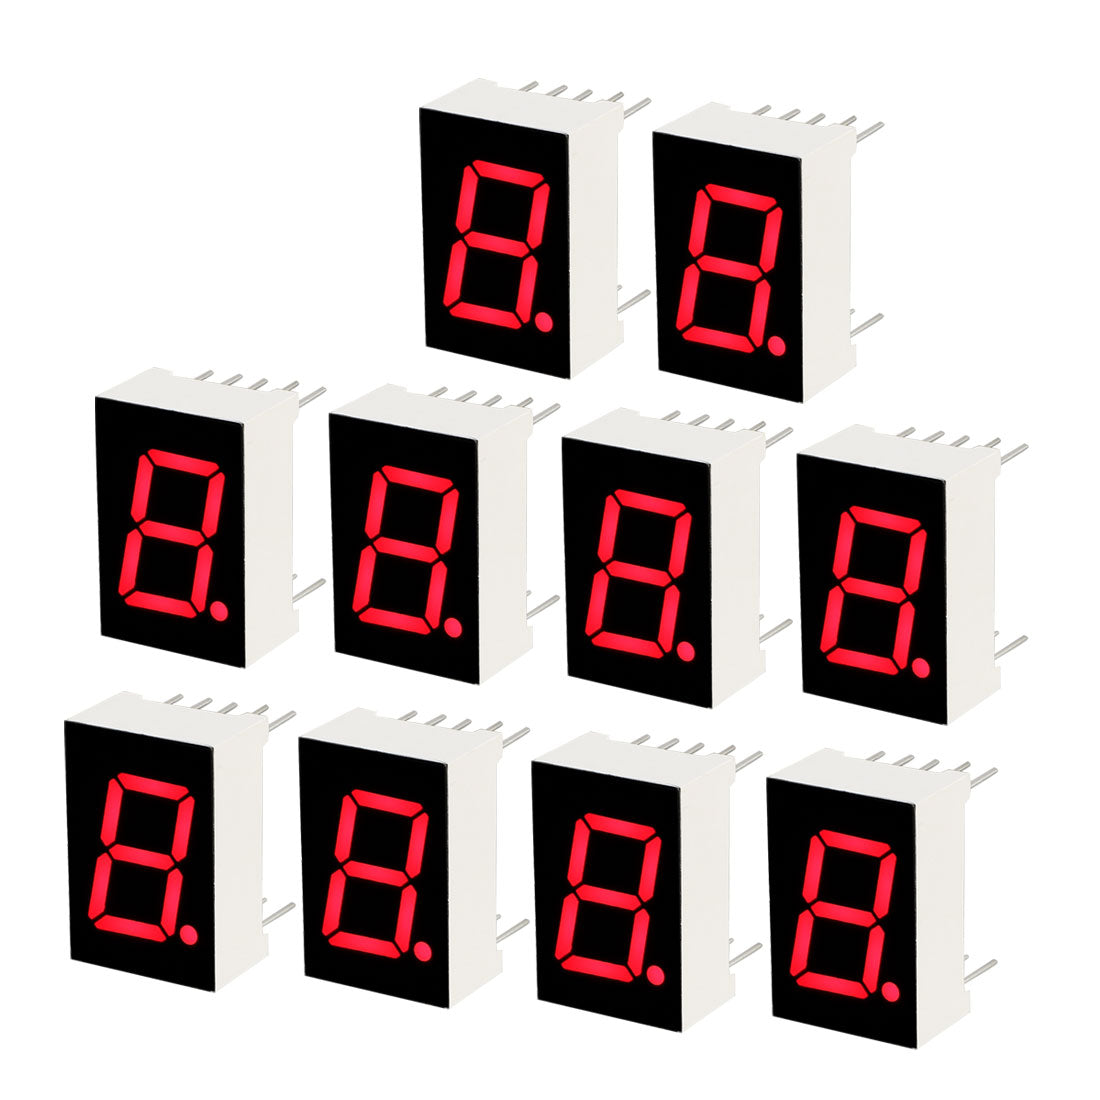 uxcell Uxcell Common Cathode 10 Pin 1 Bit 7 Segment 0.75 x 0.5 x 0.31 Inch 0.55" Red LED Display Digital Tube 10pcs